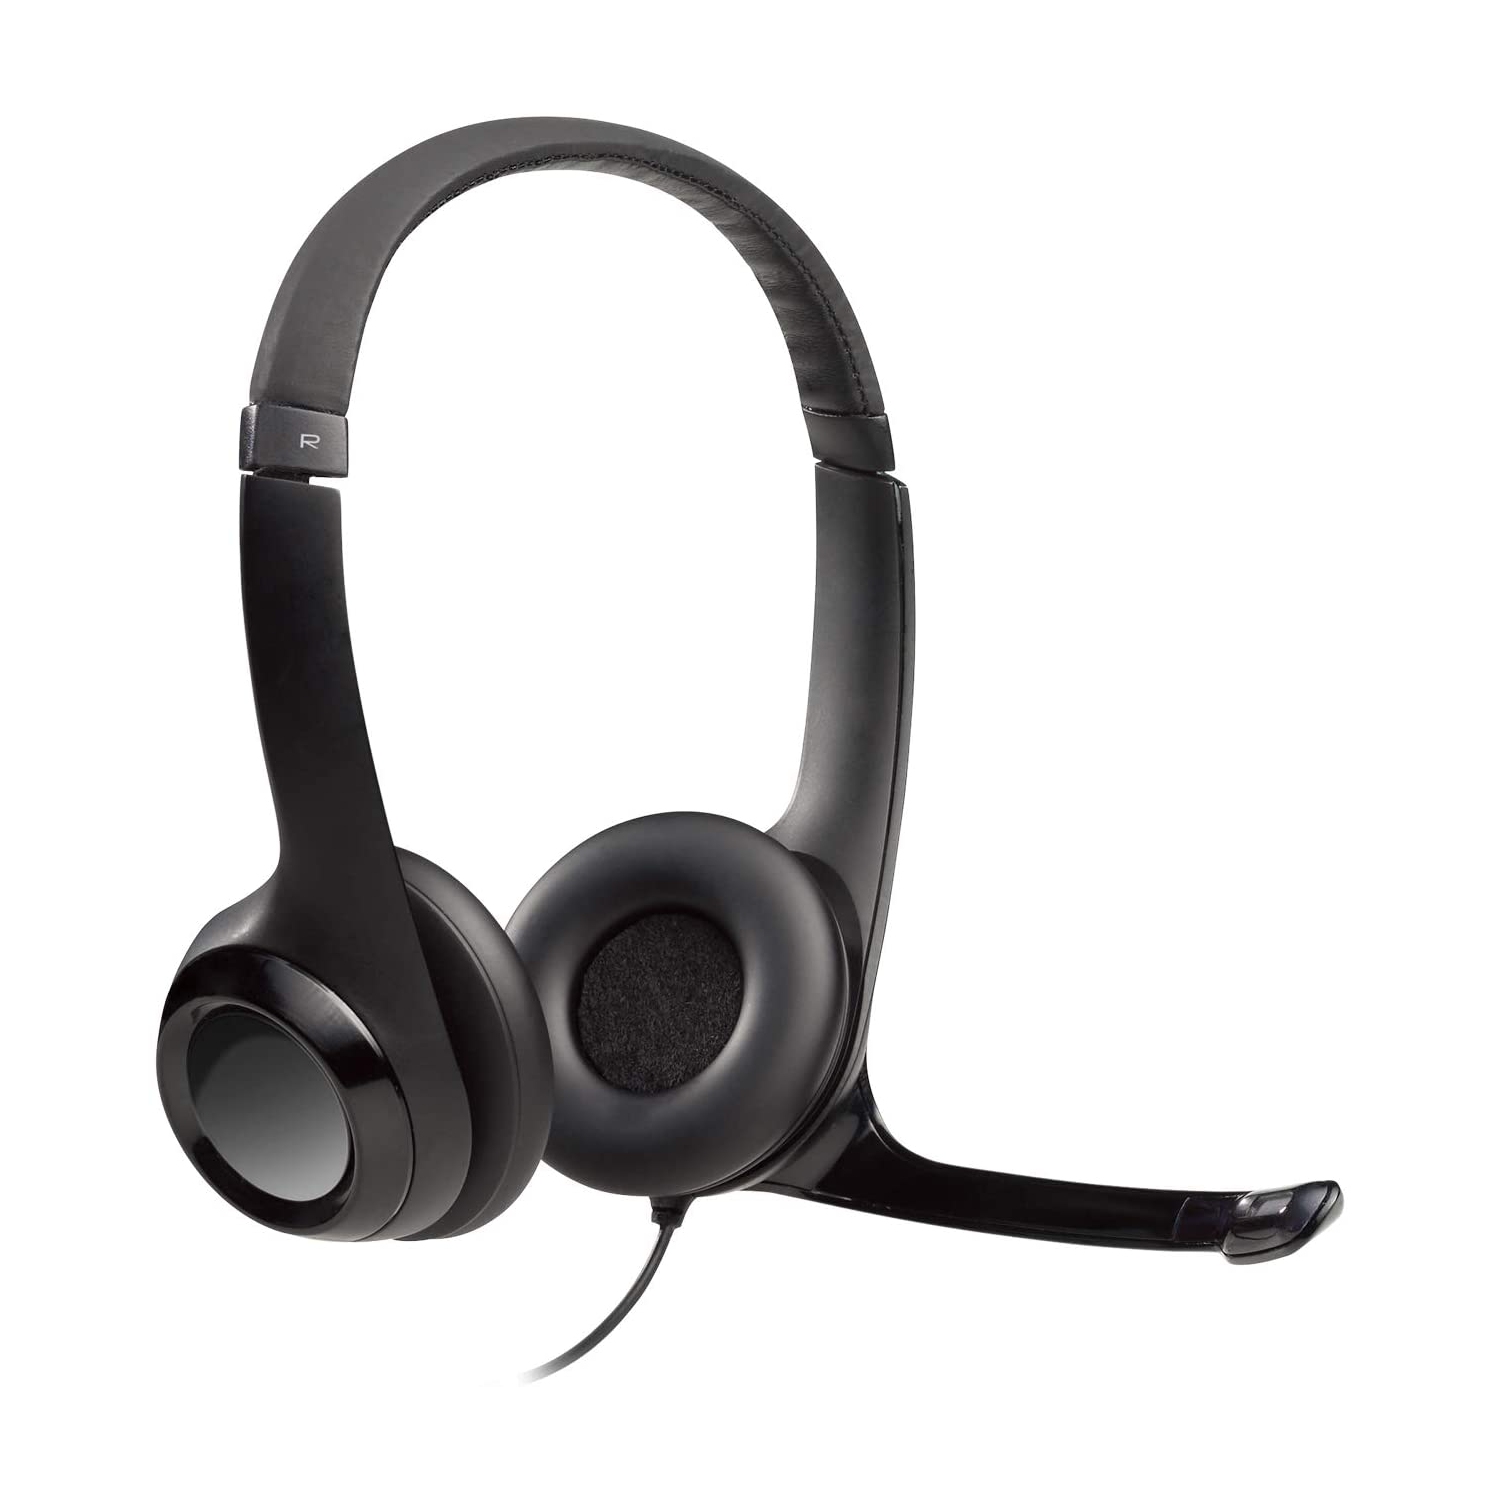 Logitech H390 USB Headset with Noise-Canceling Microphone - Black